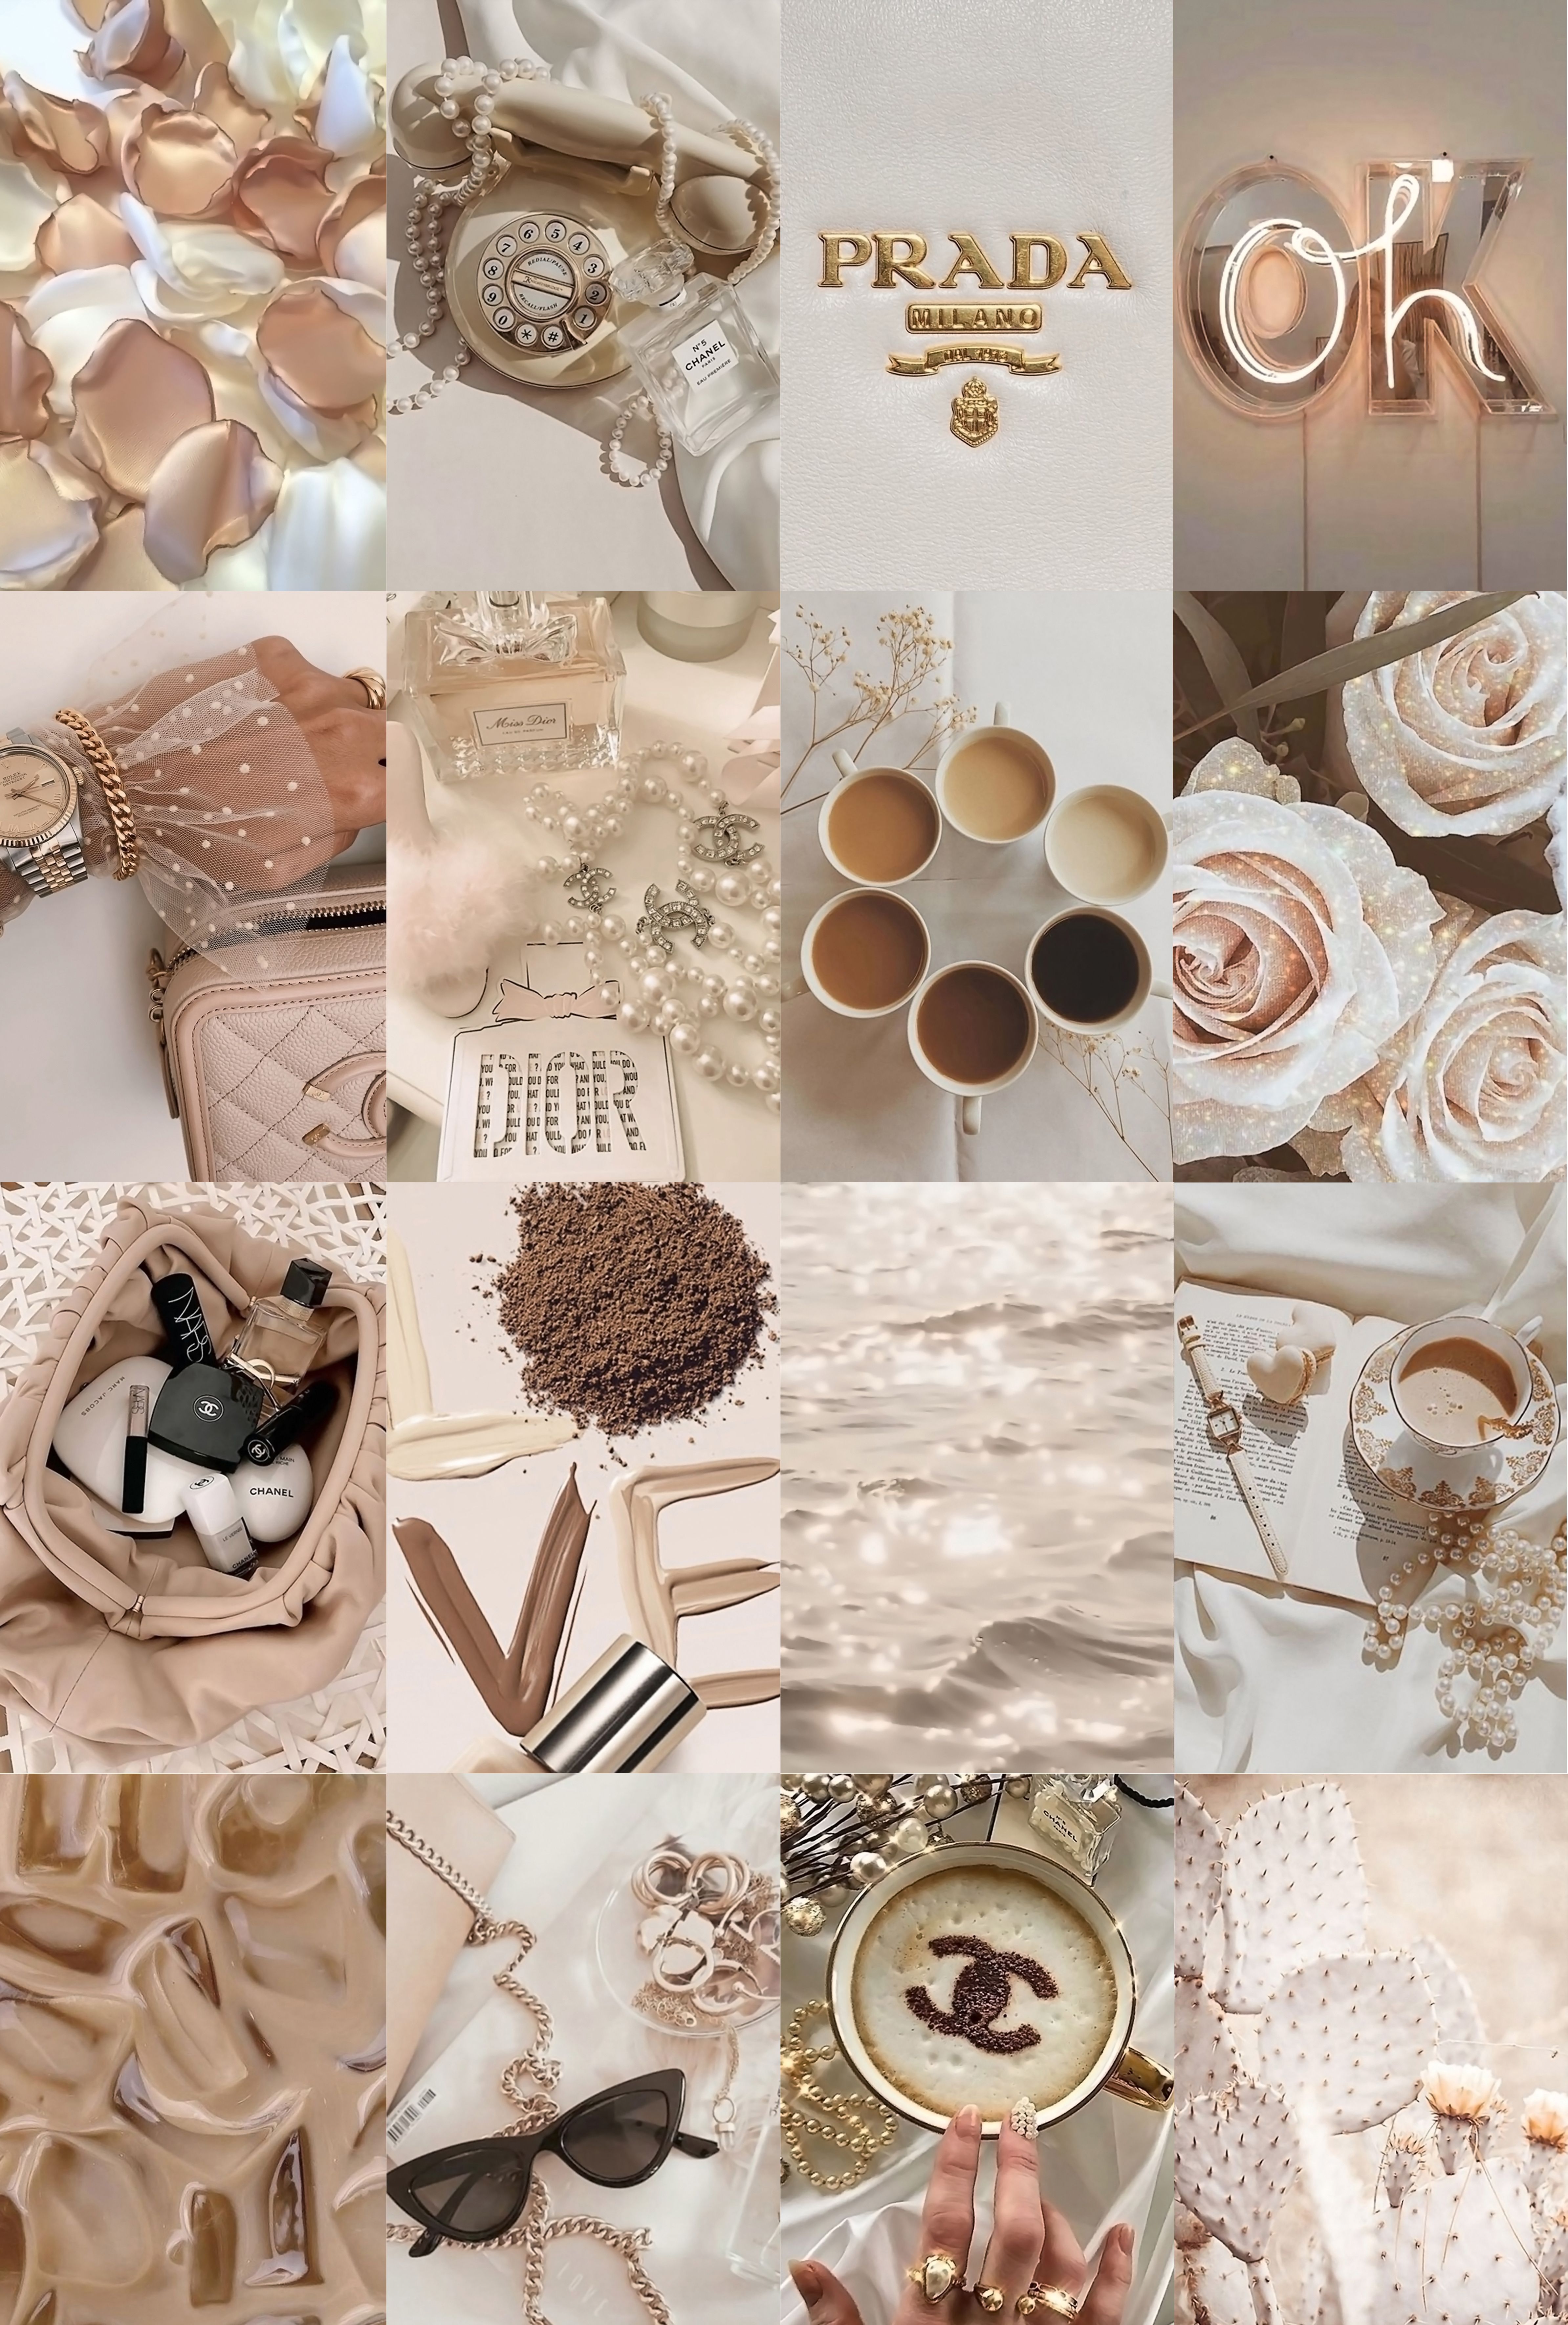 Beige Boujee Collage Kit Aesthetic 1 Beige Photo Wall UK. Aesthetic collage, Cute patterns wallpaper, iPhone wallpaper image